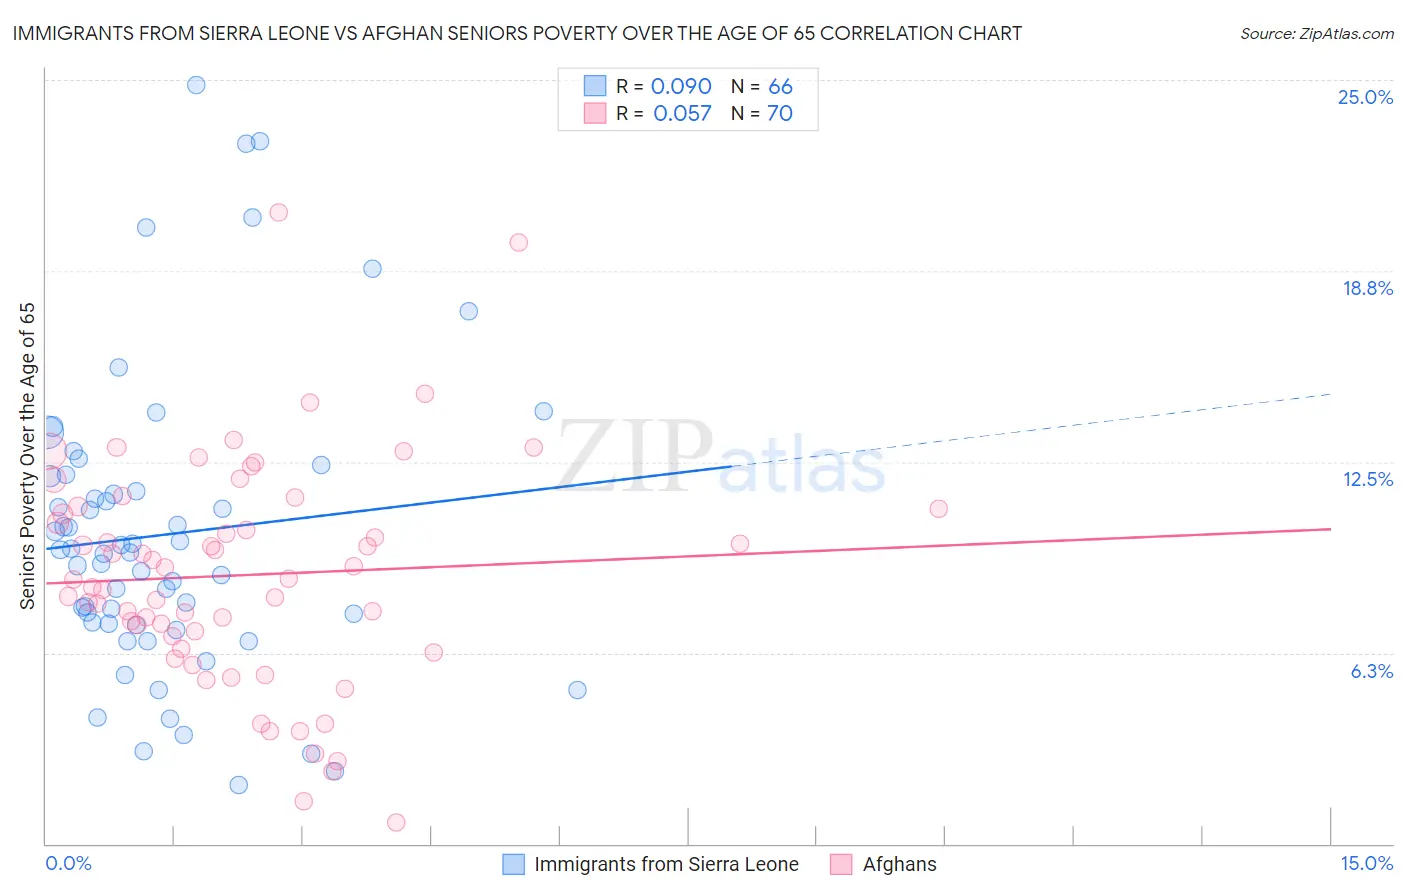 Immigrants from Sierra Leone vs Afghan Seniors Poverty Over the Age of 65